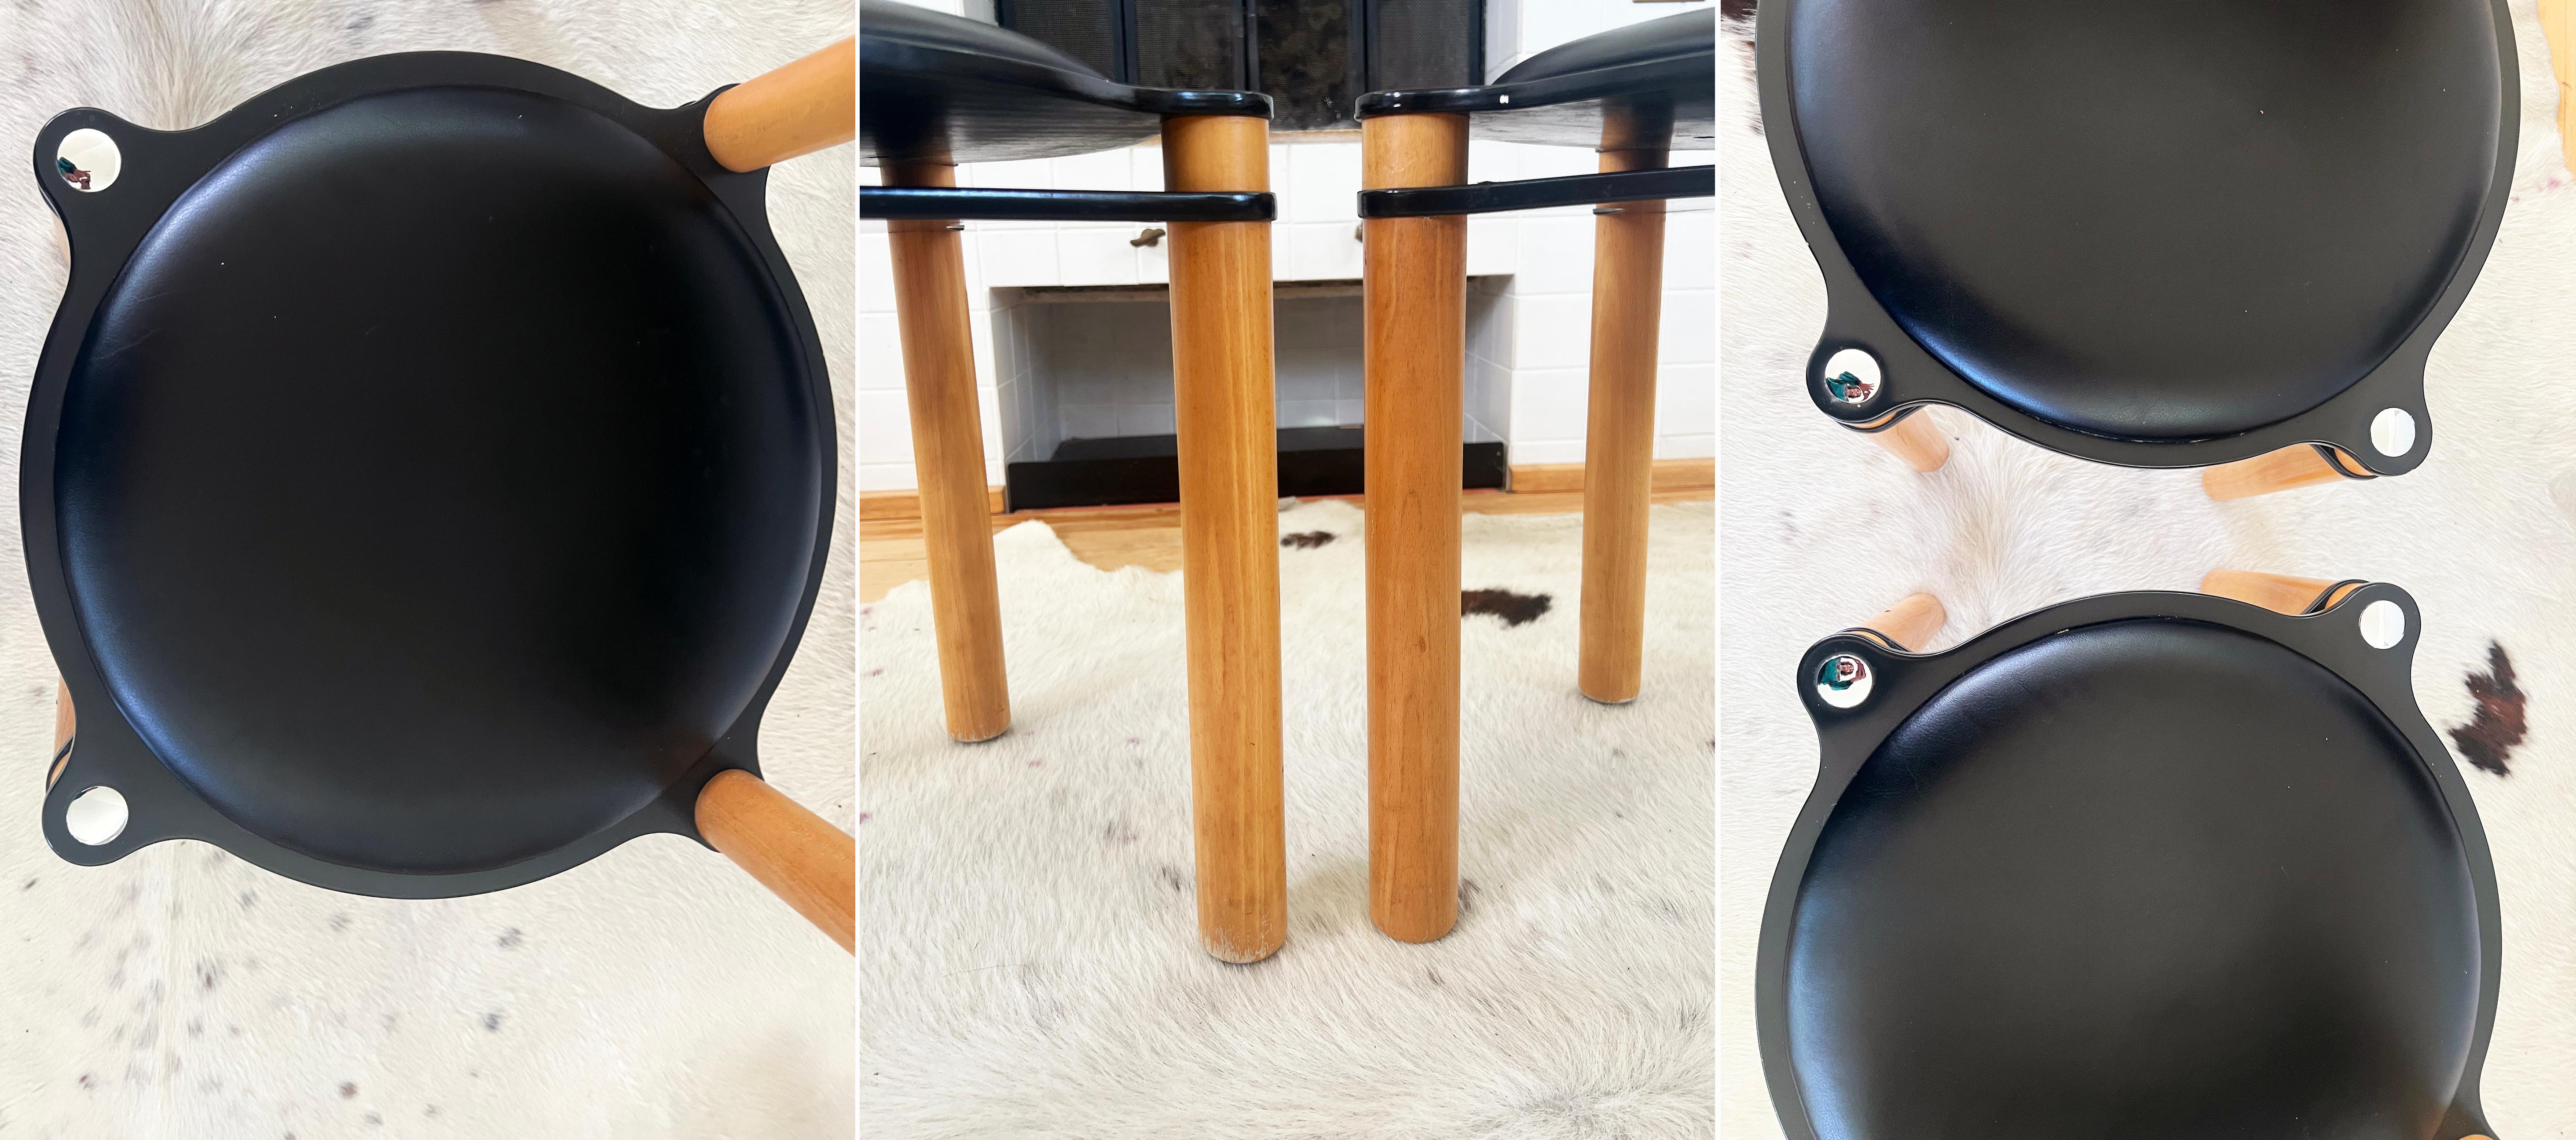 Set of 4 Postmodern Black and Wood Chairs by Kurt Thut for Dietiker, 1980s For Sale 1